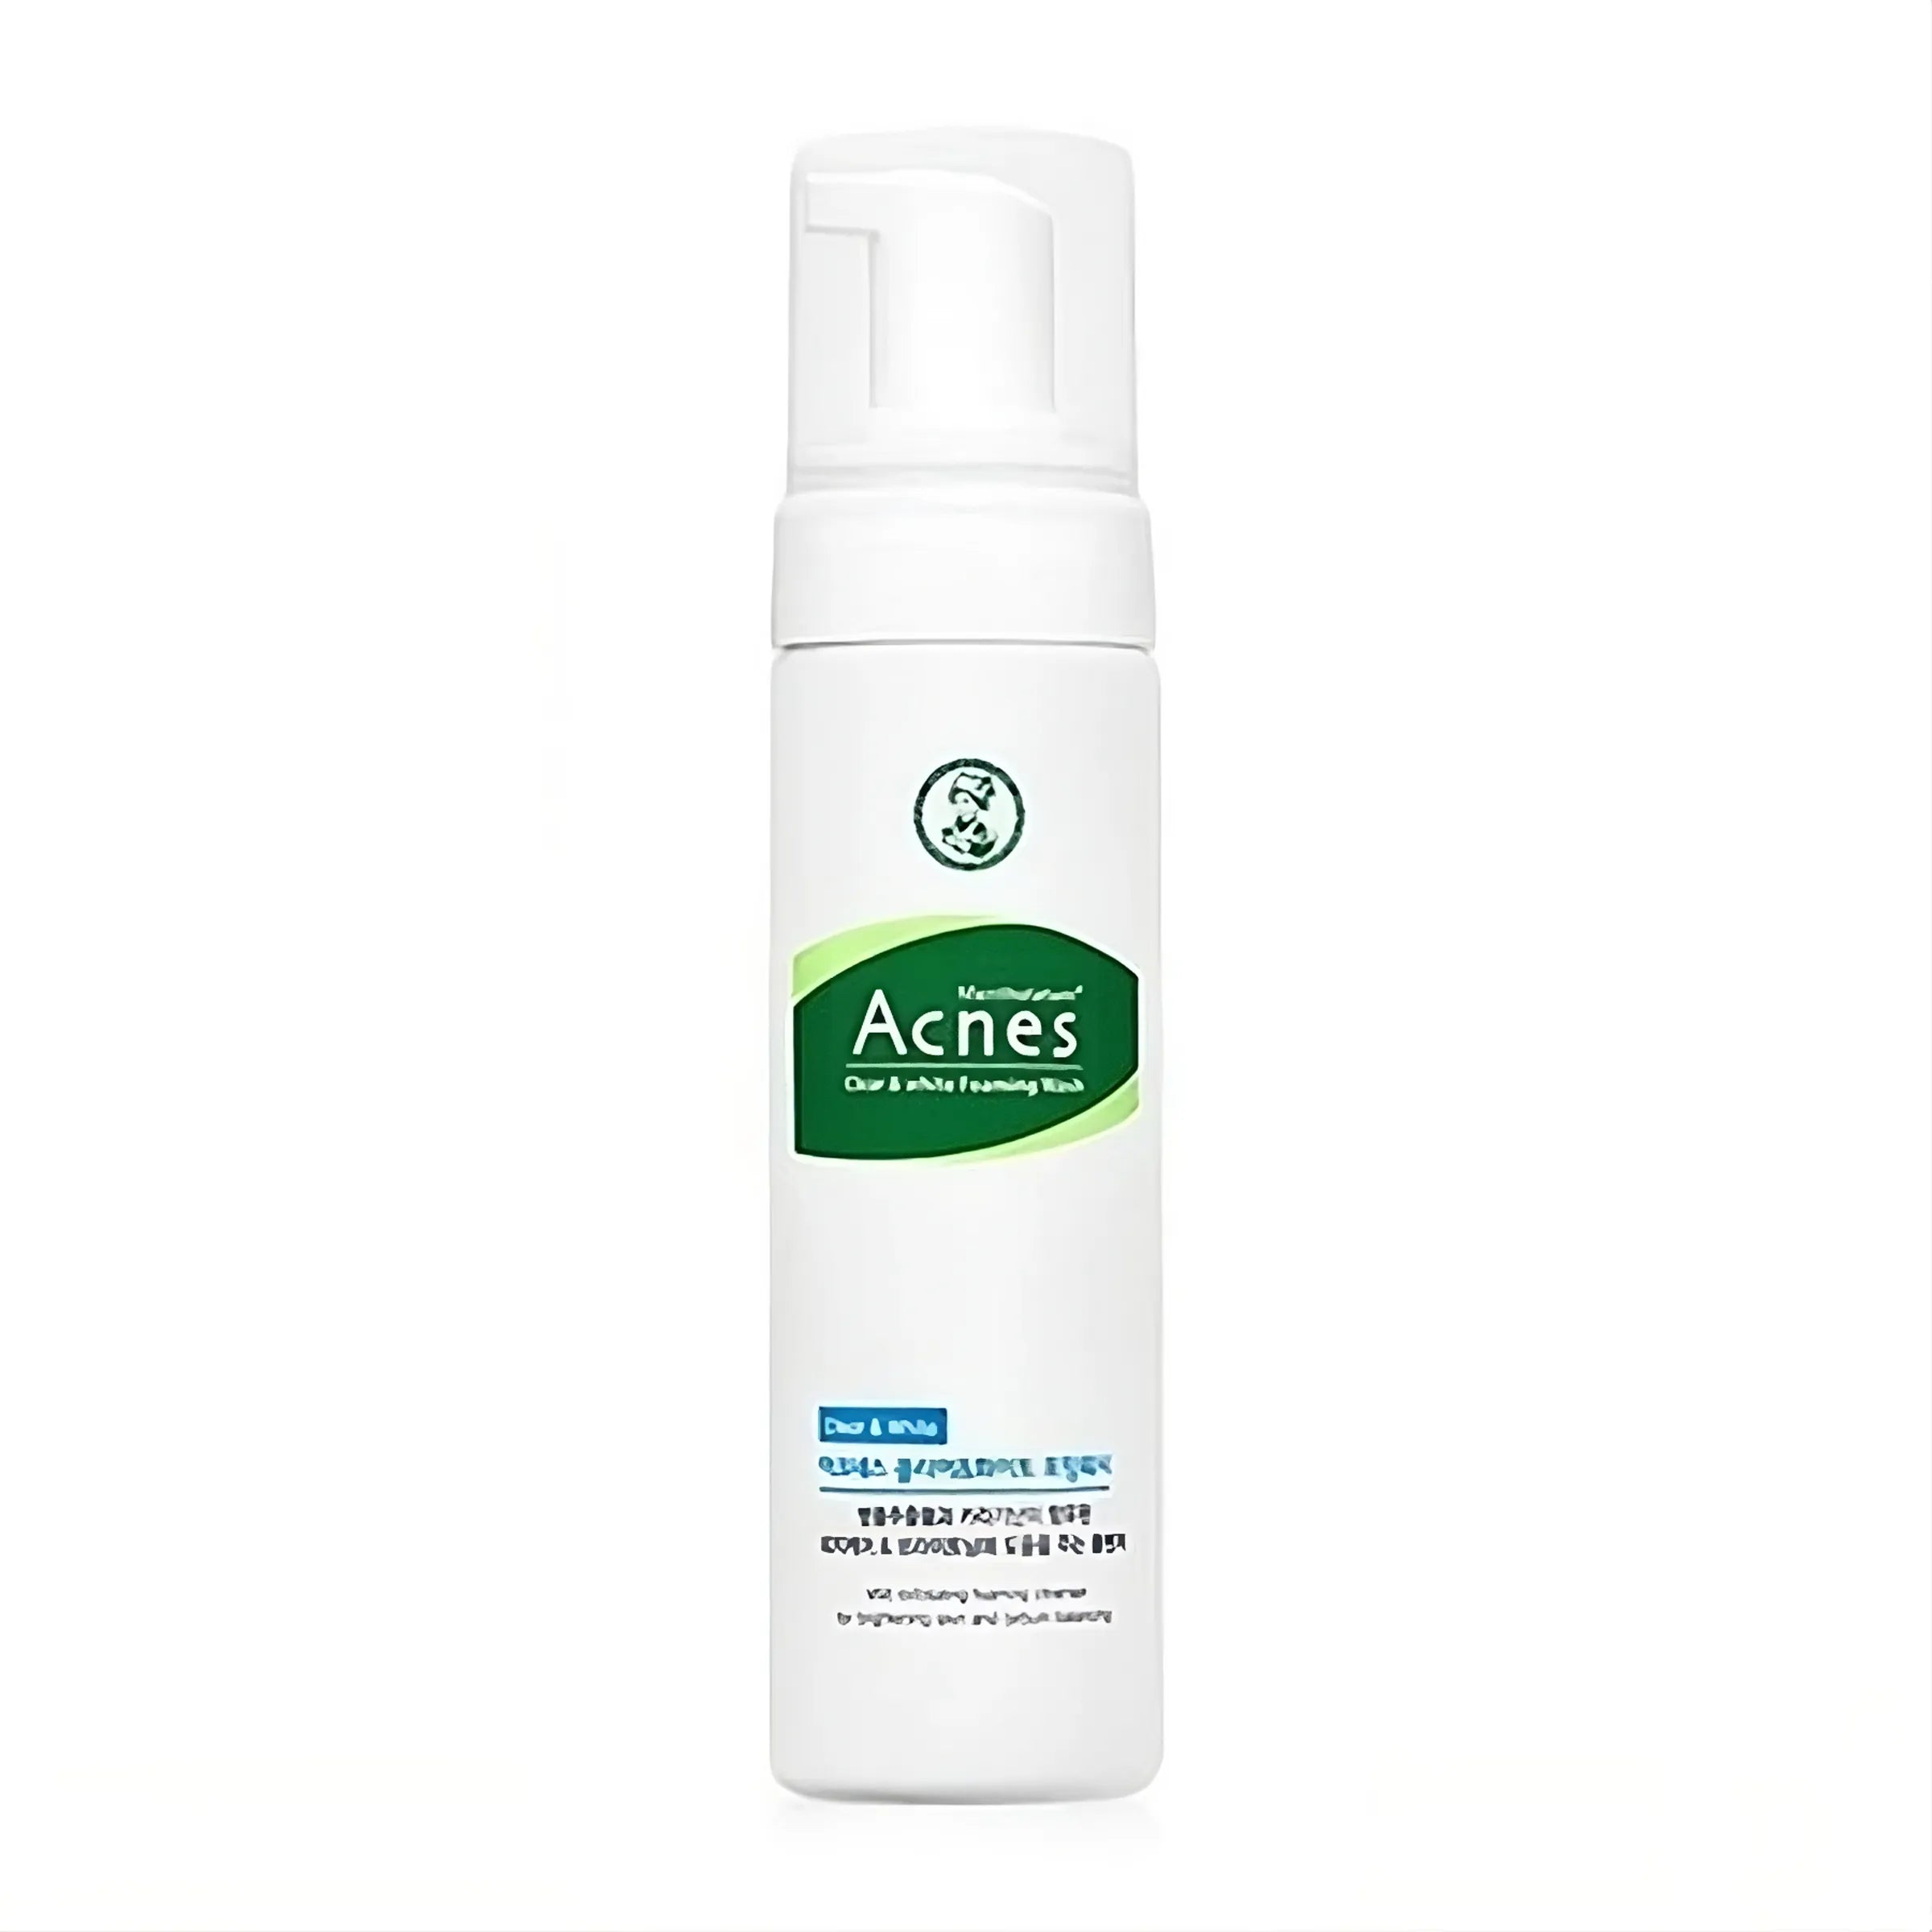 ACNES Clear and White Foaming Wash 150ml - DODOSKIN